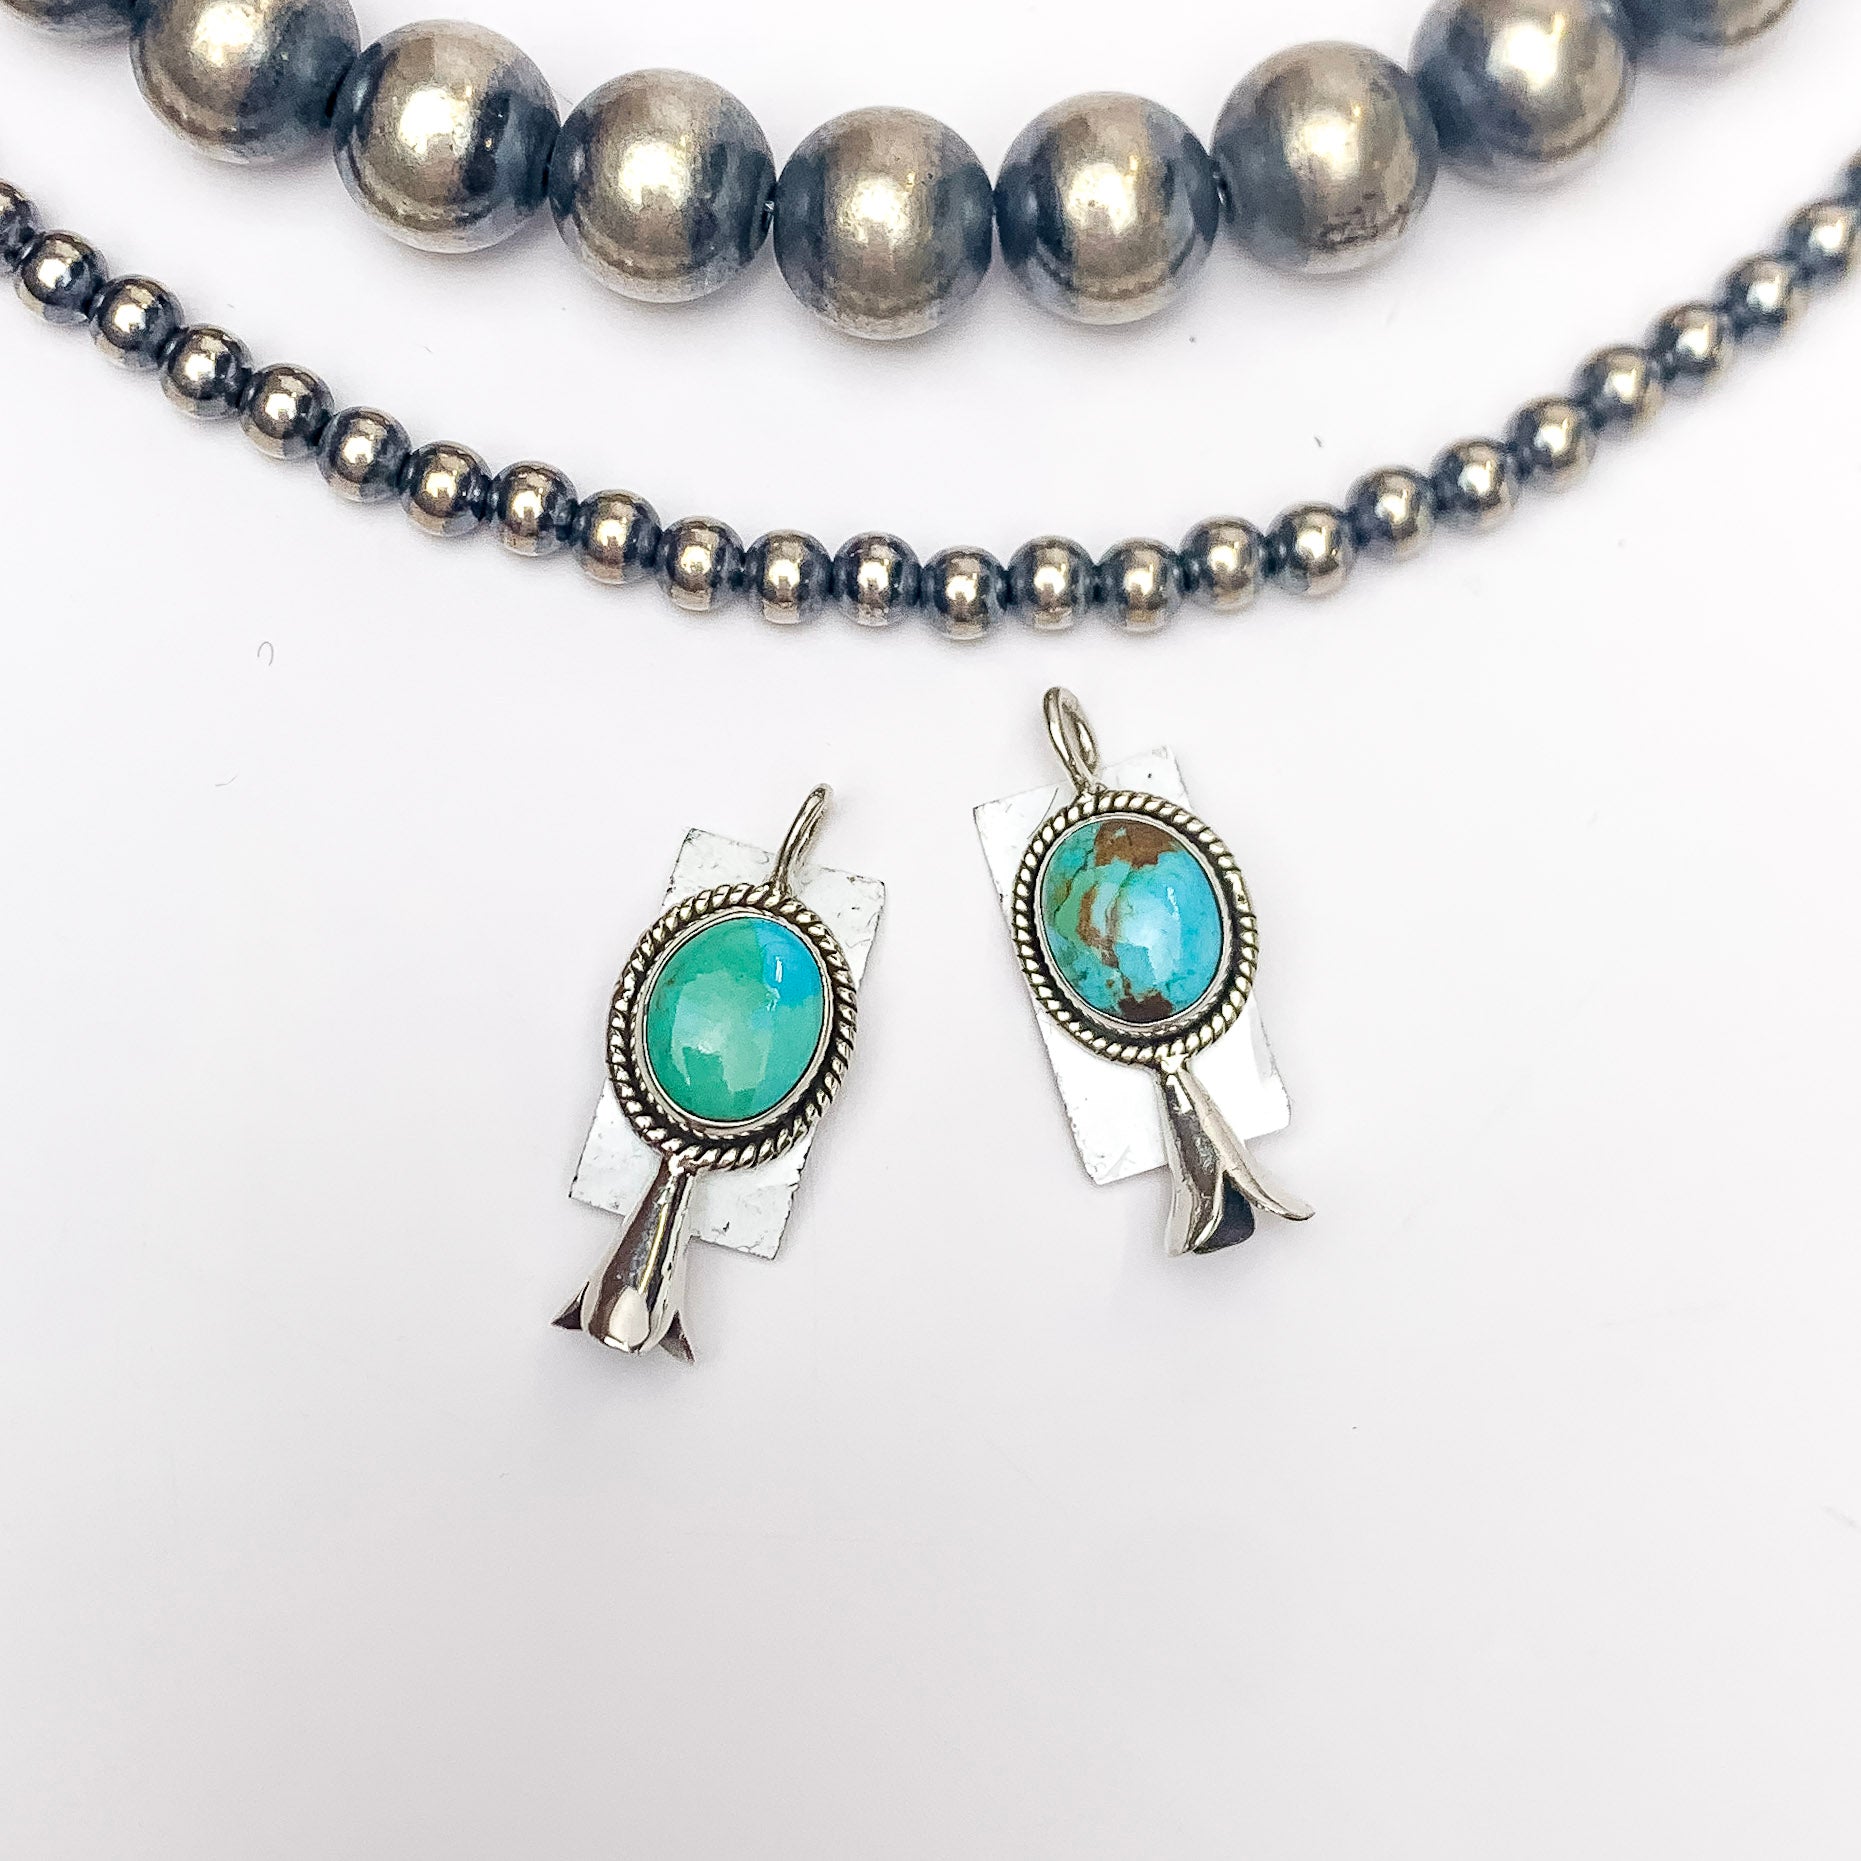 HaDa Collections | Sterling Silver Squash Blossom Pendant with Kingman Turquoise Stone - Giddy Up Glamour Boutique